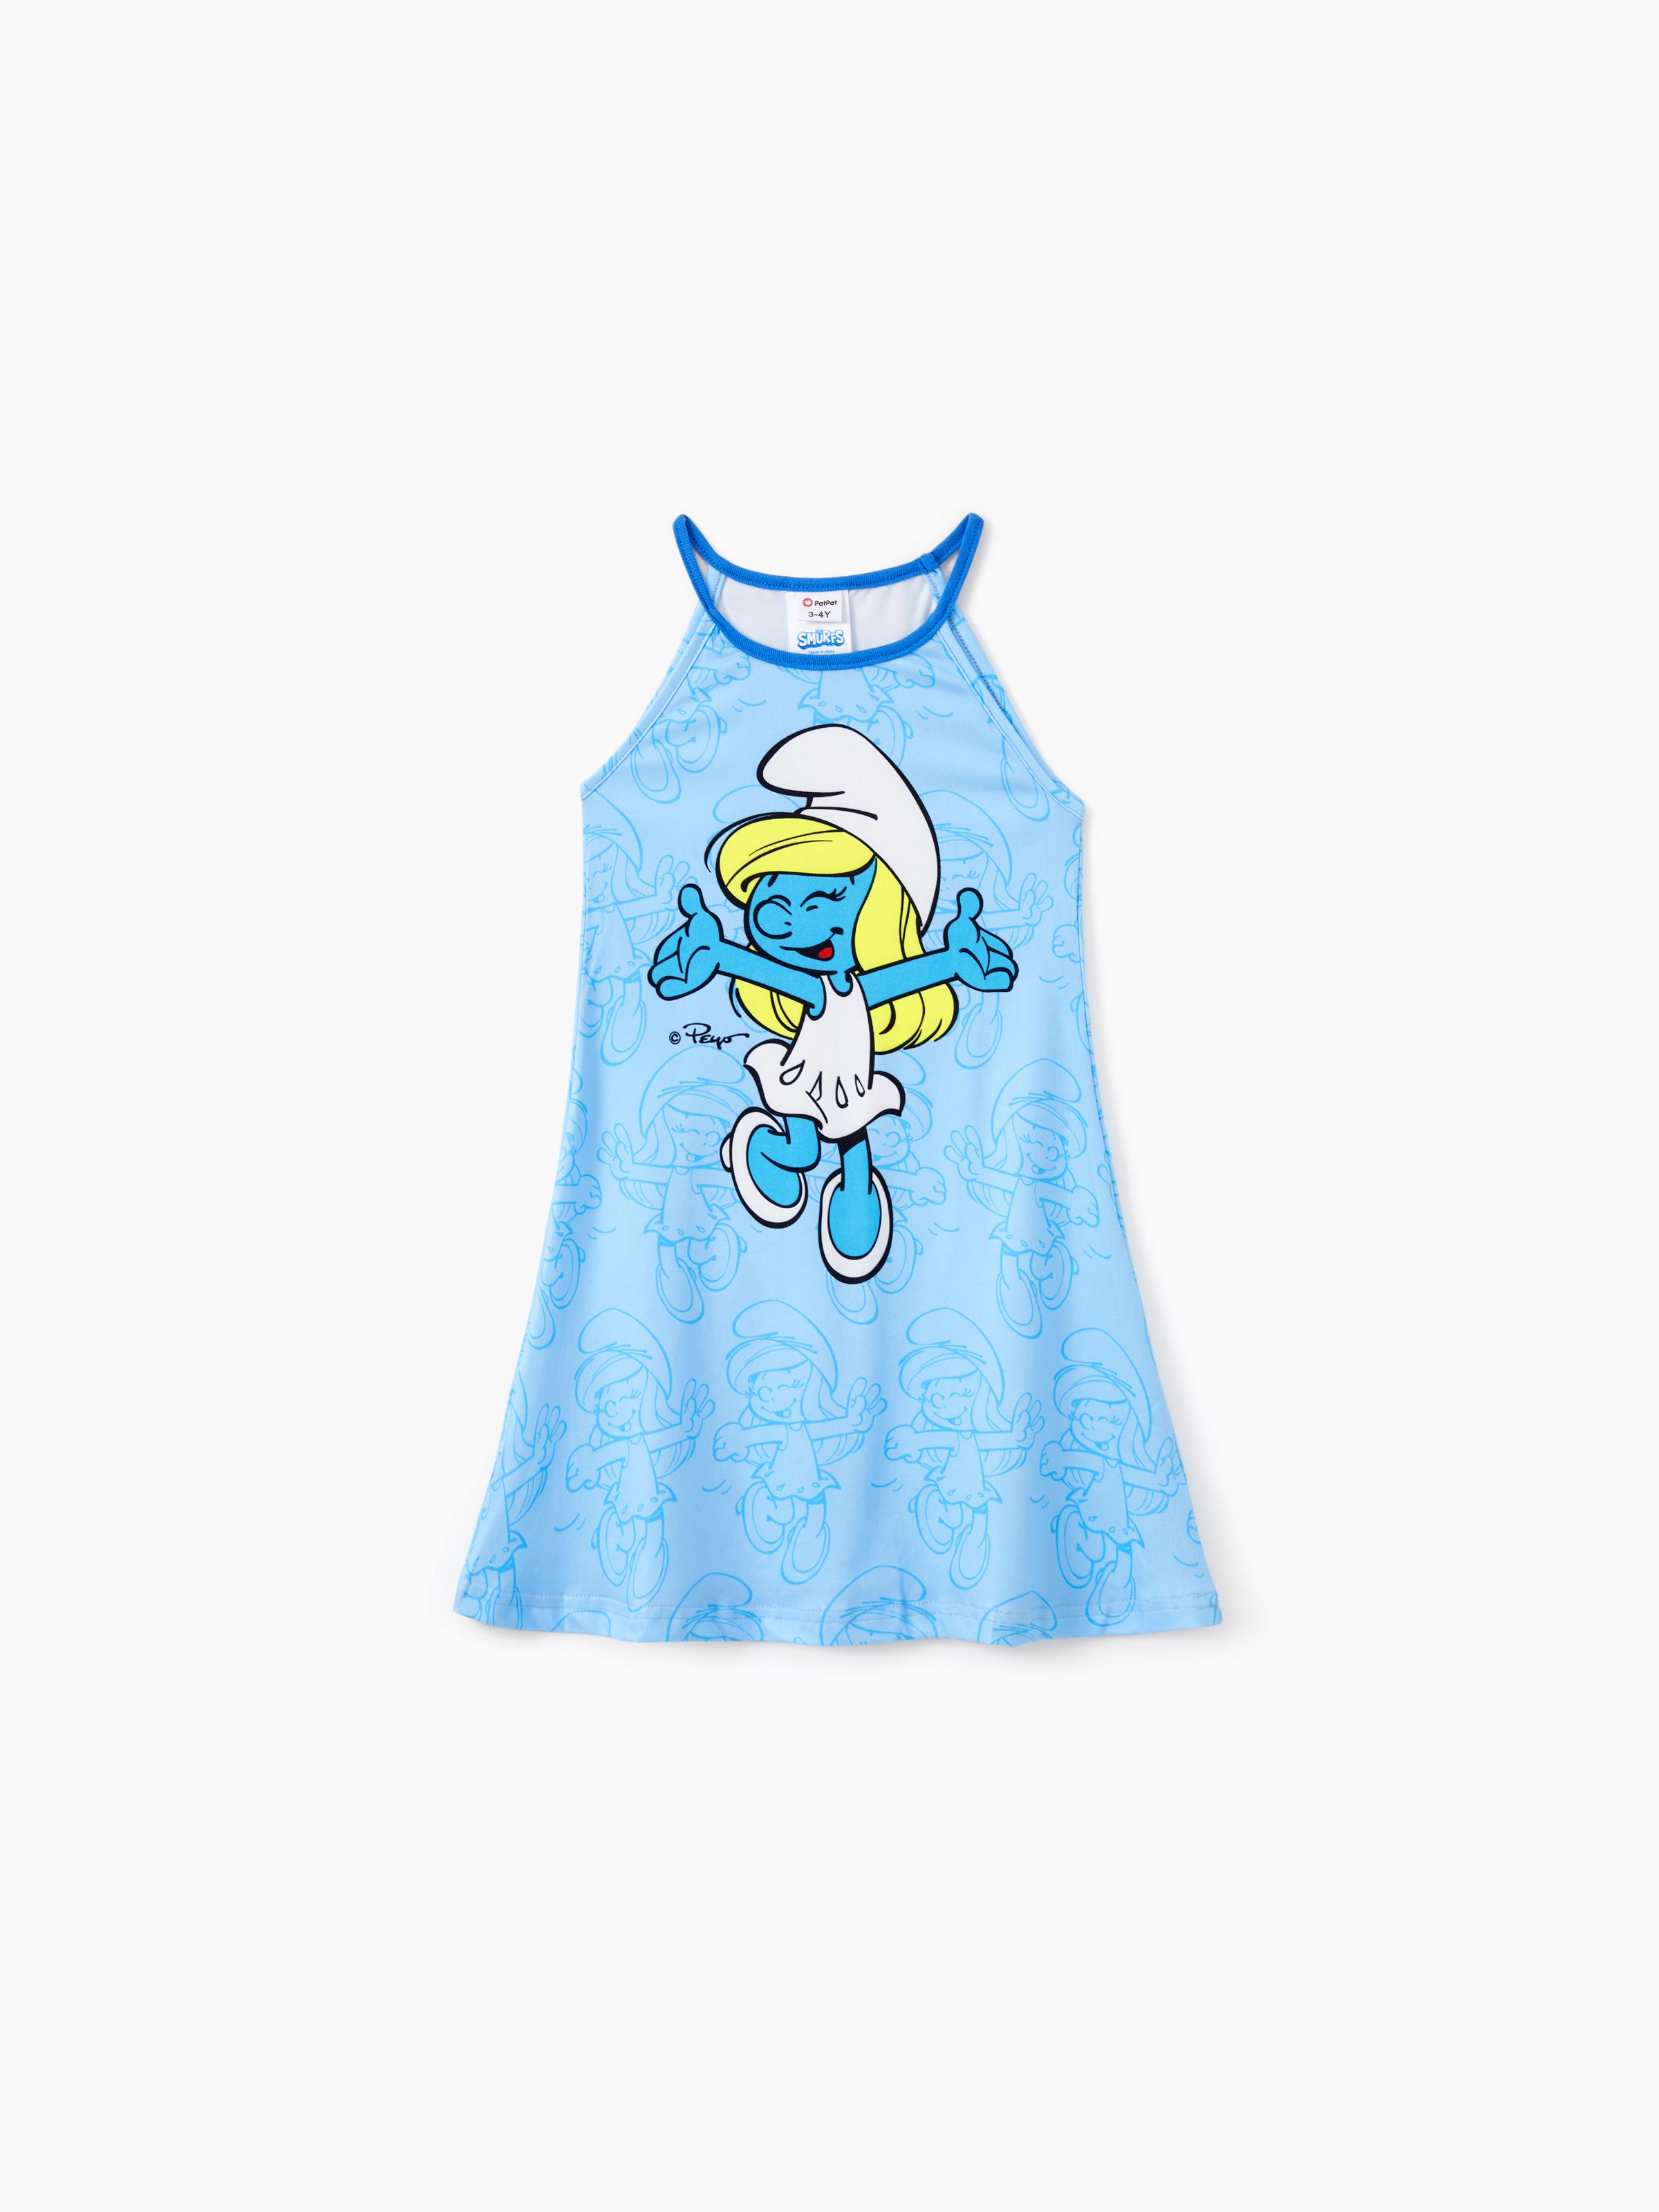 

The Smurfs Family Matching Character Print Onesie/Sleevelss Dress/Tee